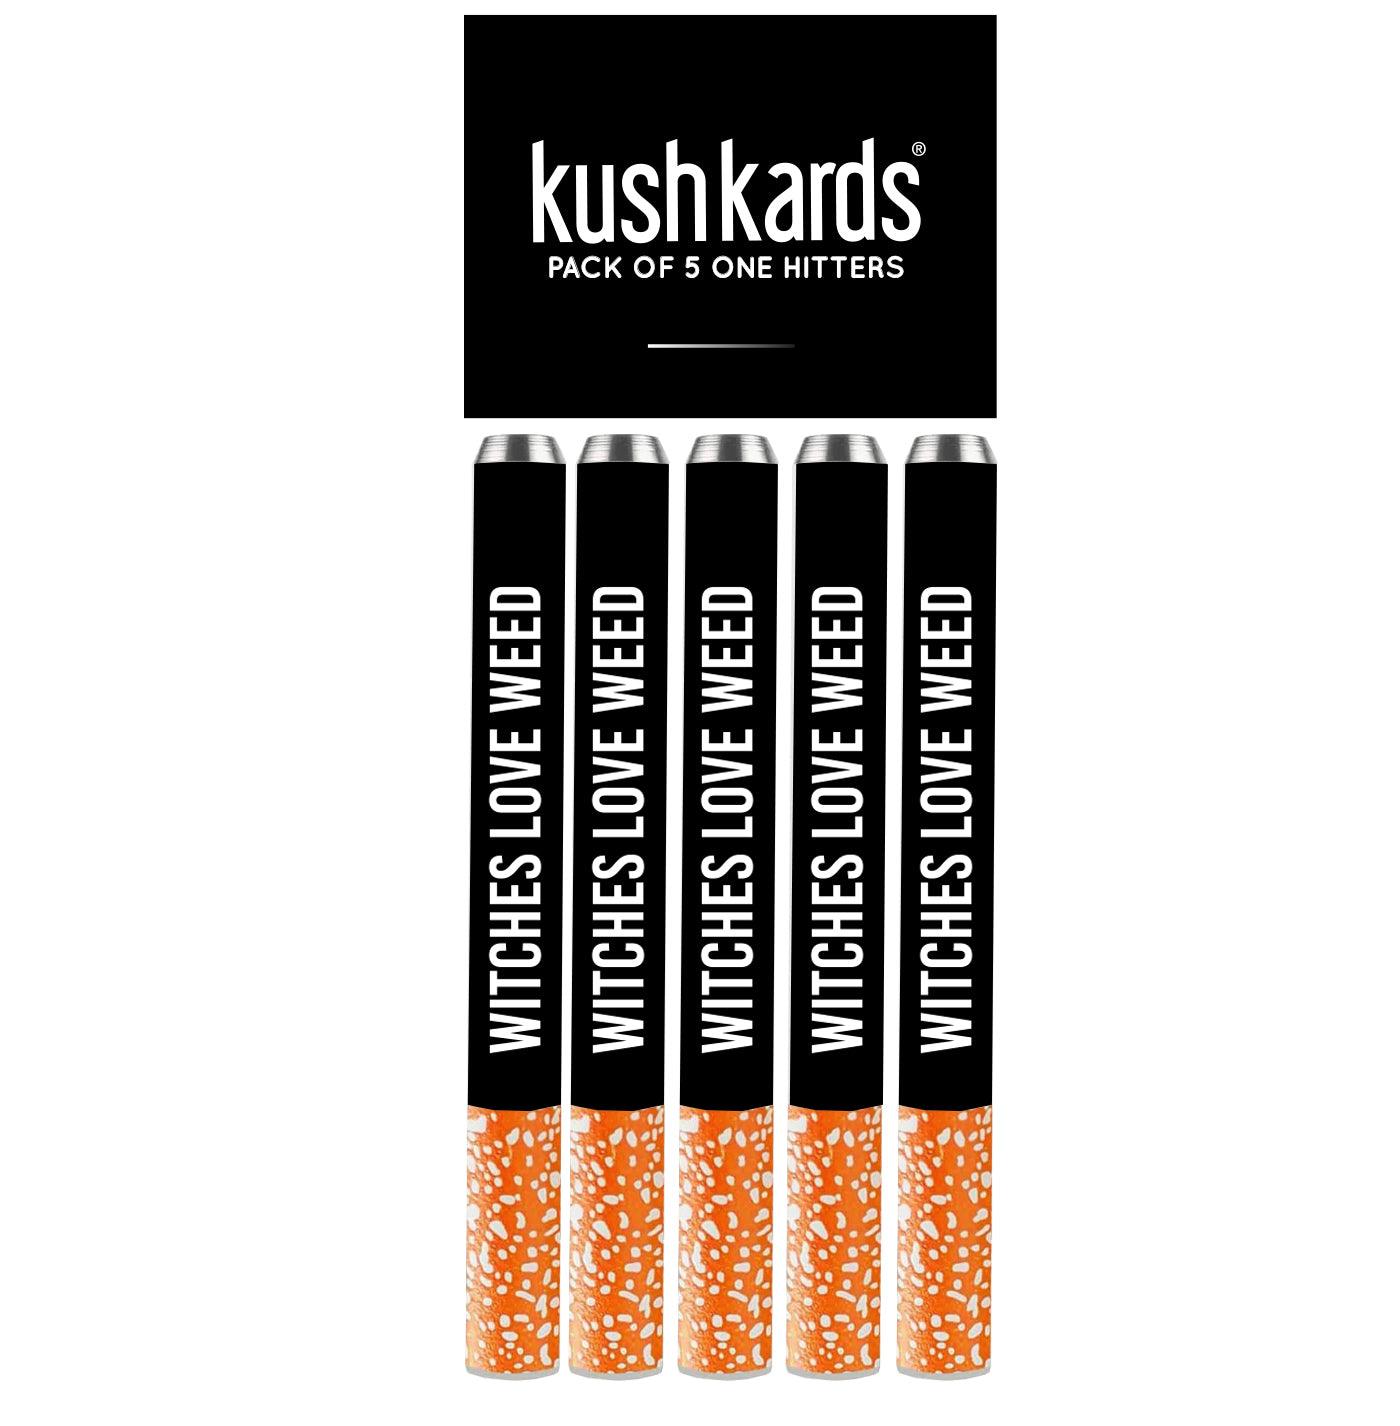 Witches Love Weed One Hitter 5 Pack - KushKards